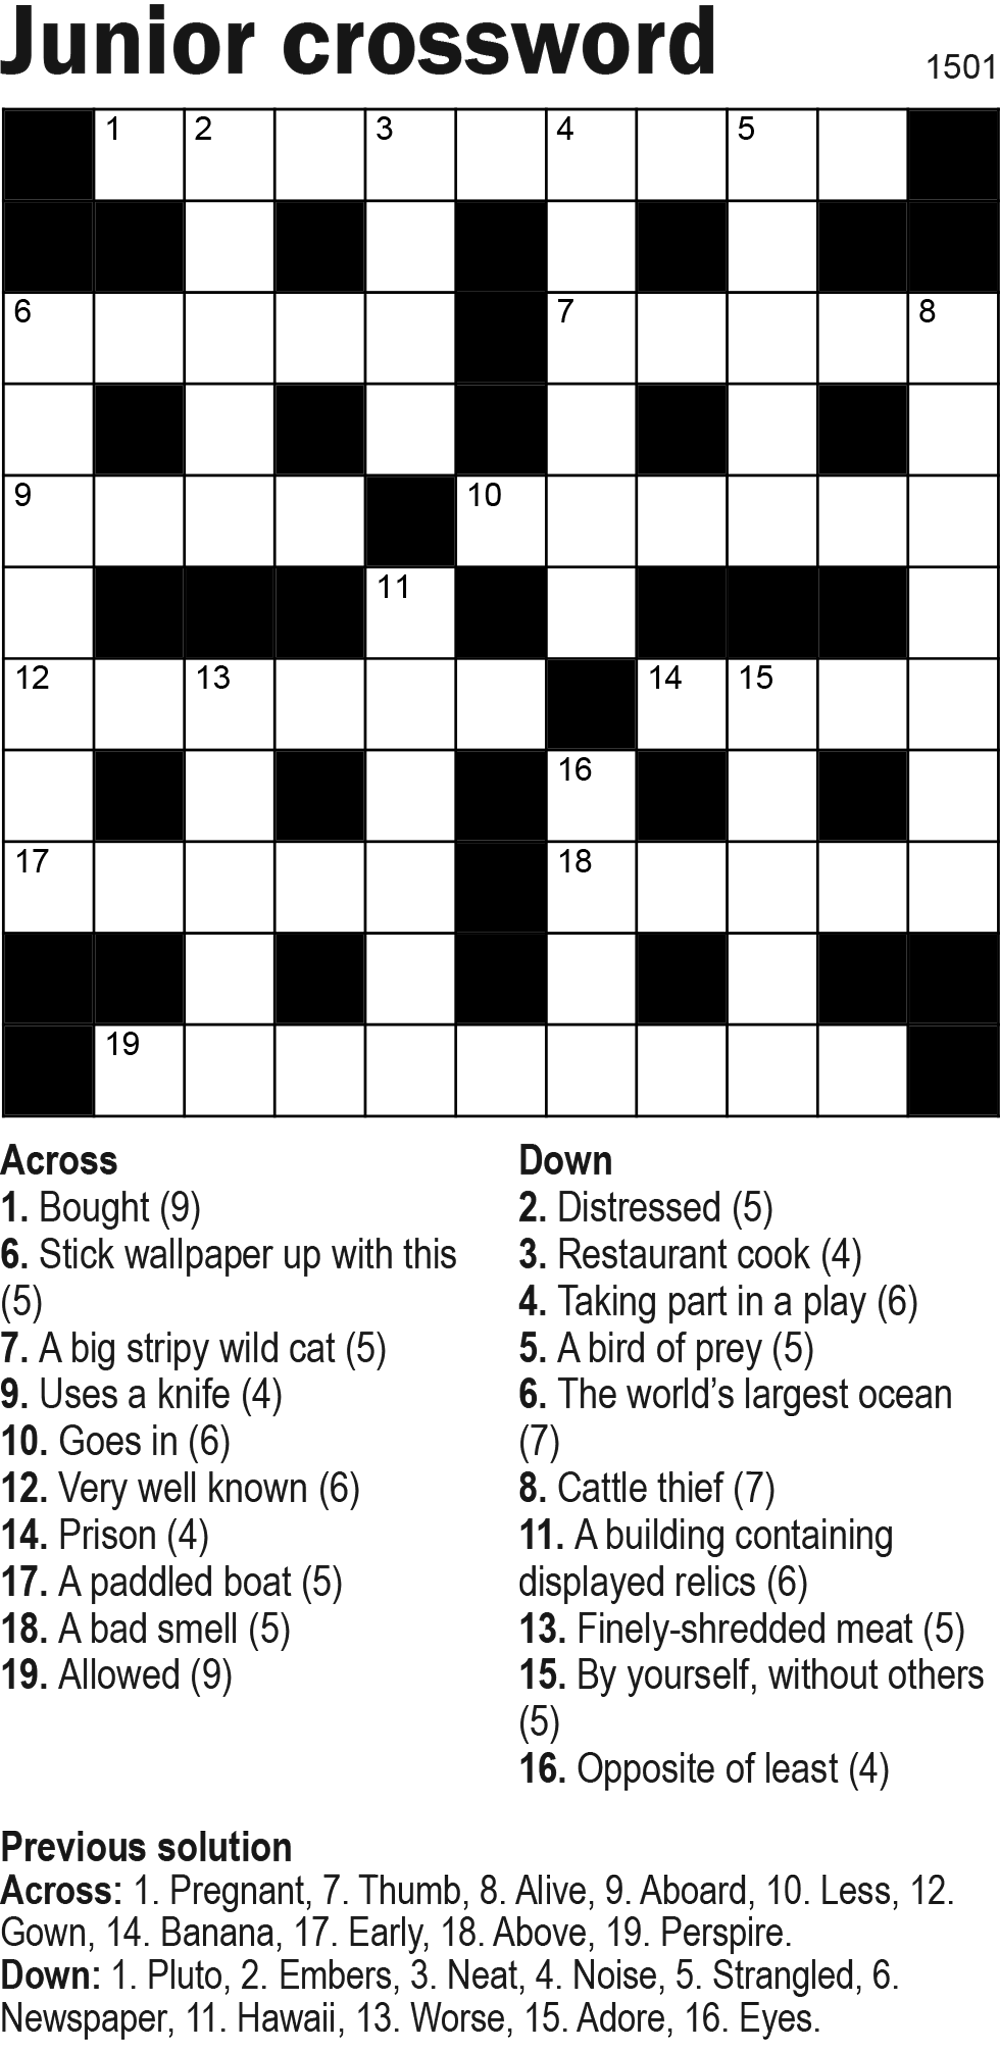 Junior Crossword 11x11 Knight Features Content Worth Sharing